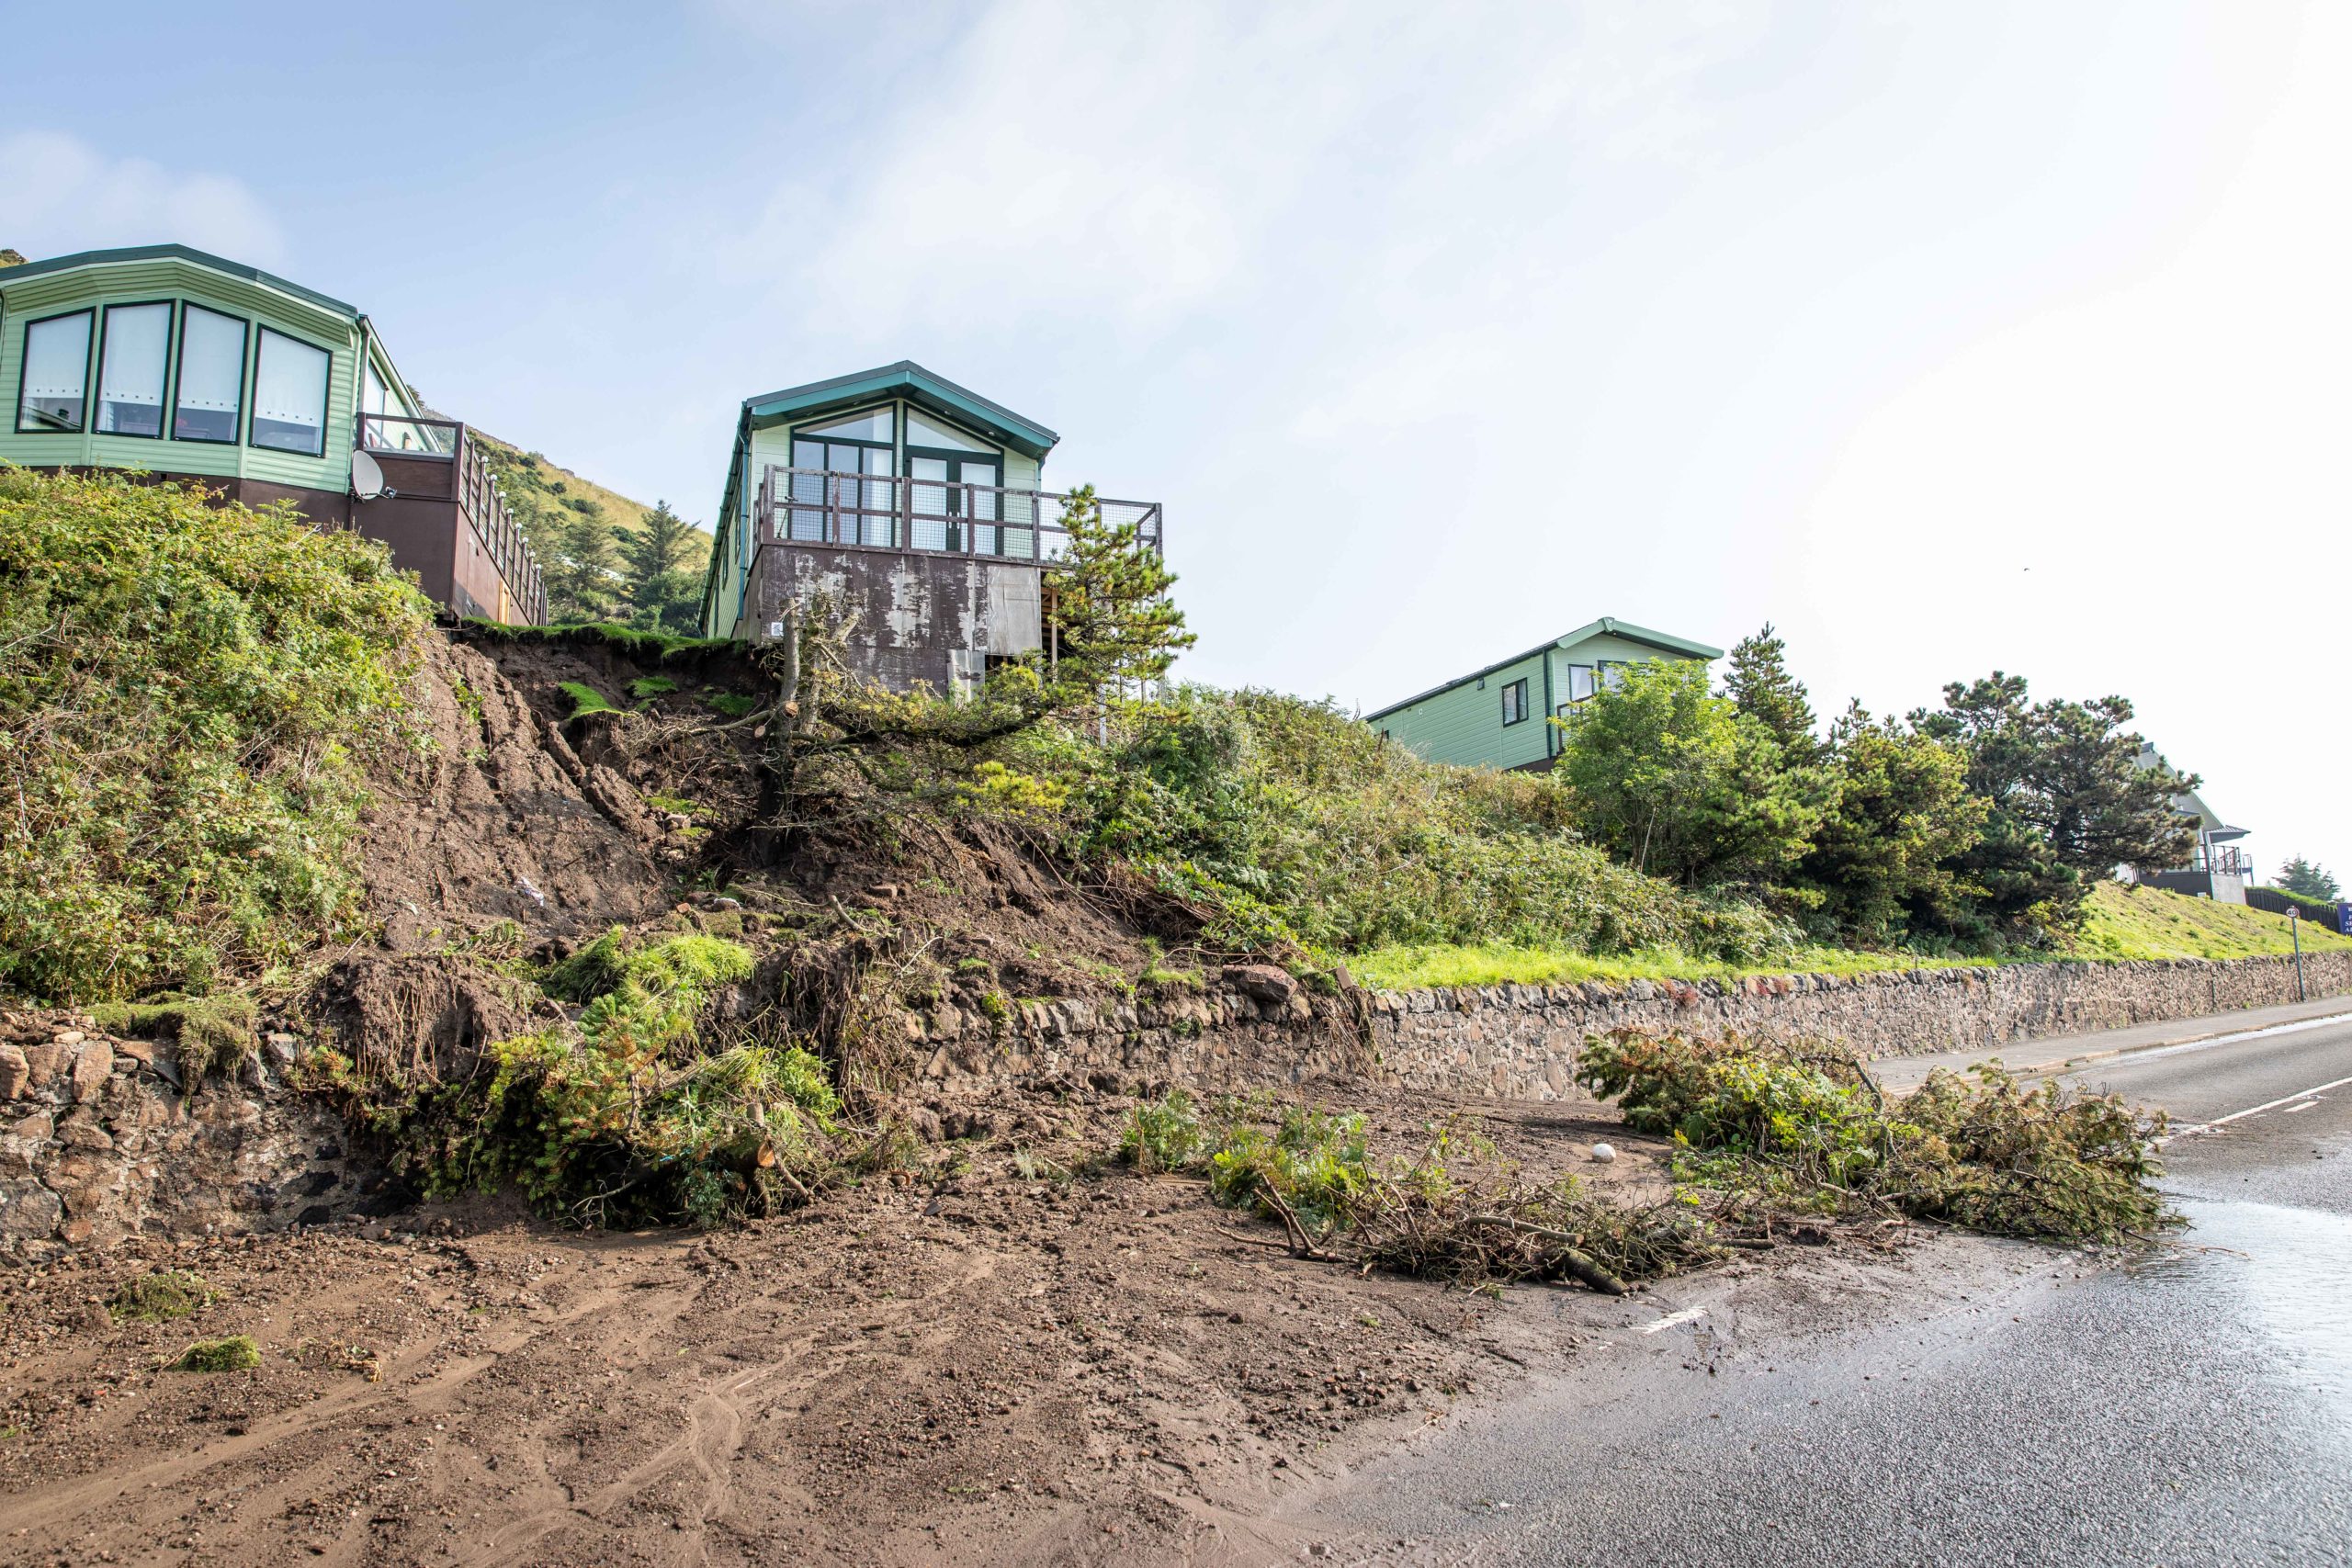 The Fife holiday park had to be evacuated after storms triggered two landslides.